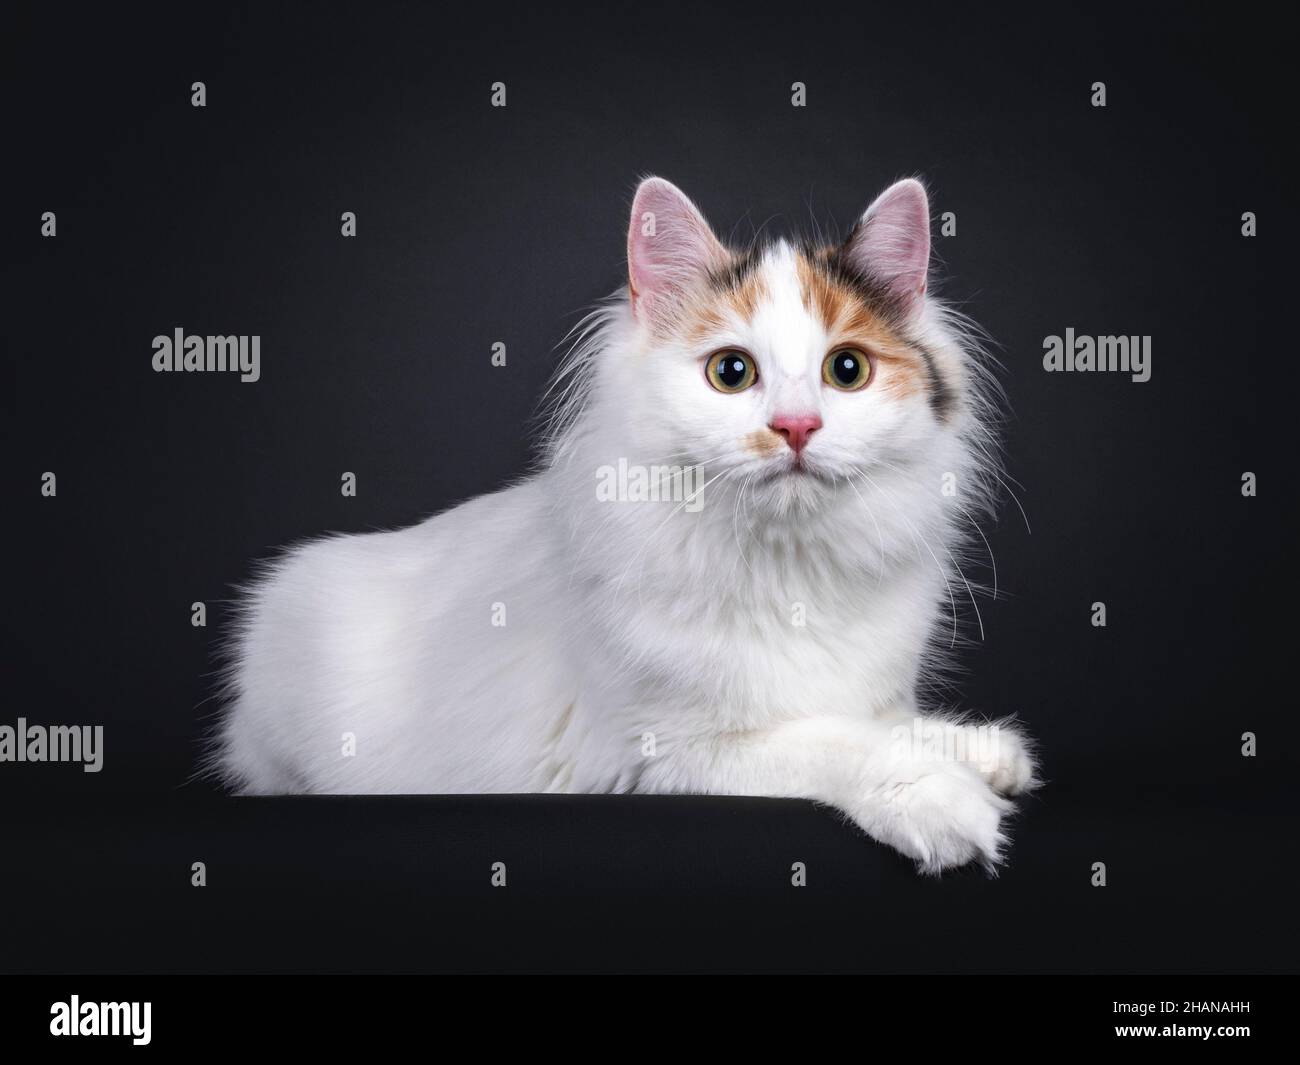 Adorable young Turkish Van cat, laying down side ways. Looking straight ahead away from camera. Isolated on a black background. Stock Photo